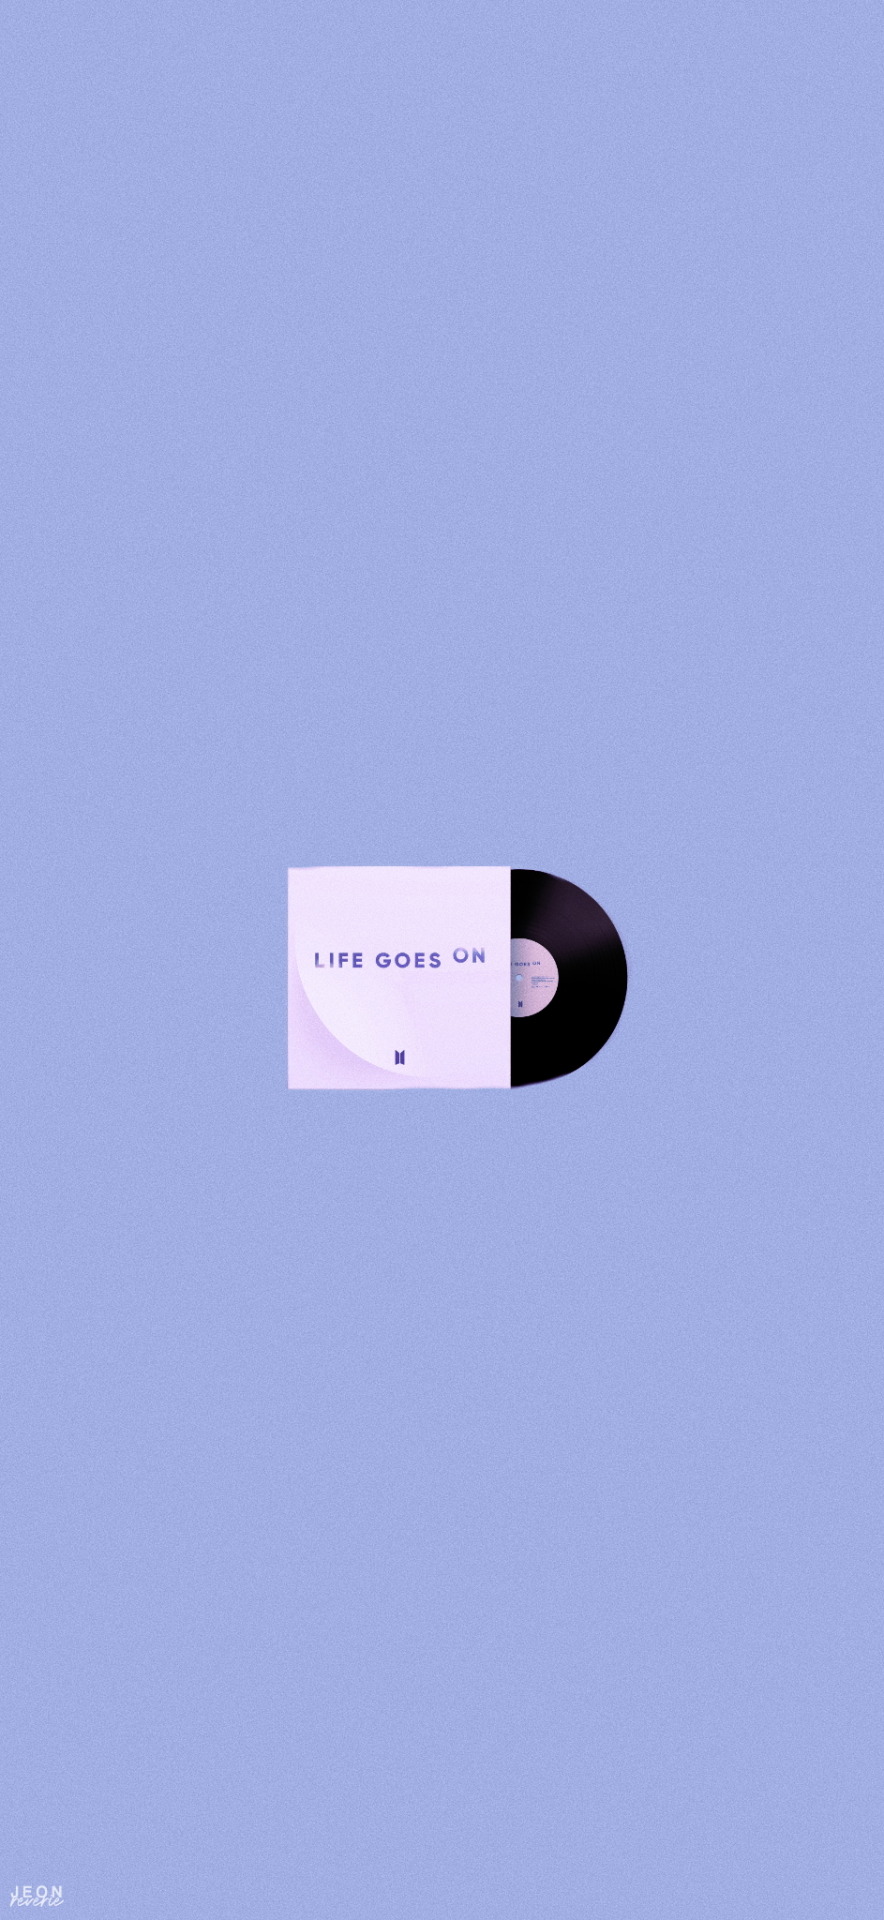 Bts Life Goes On Wallpapers Explore Tumblr Posts And Blogs Tumgir